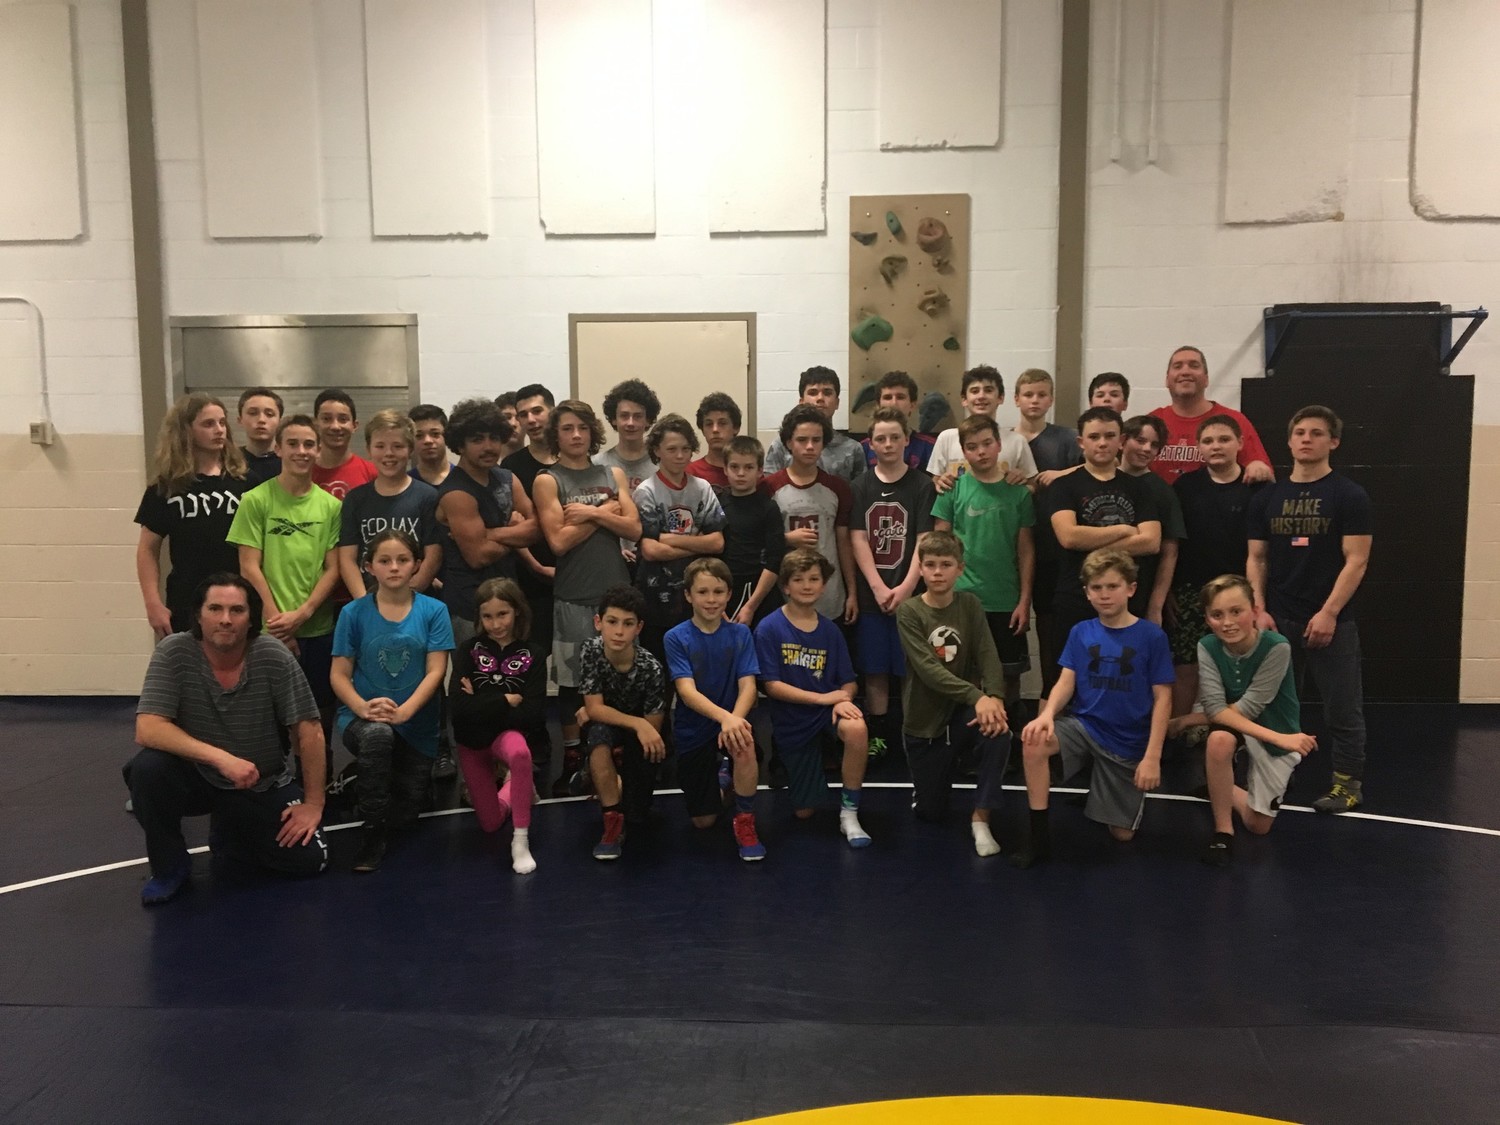 Members of the Barrington Middle School wrestling team pose for a photograph.